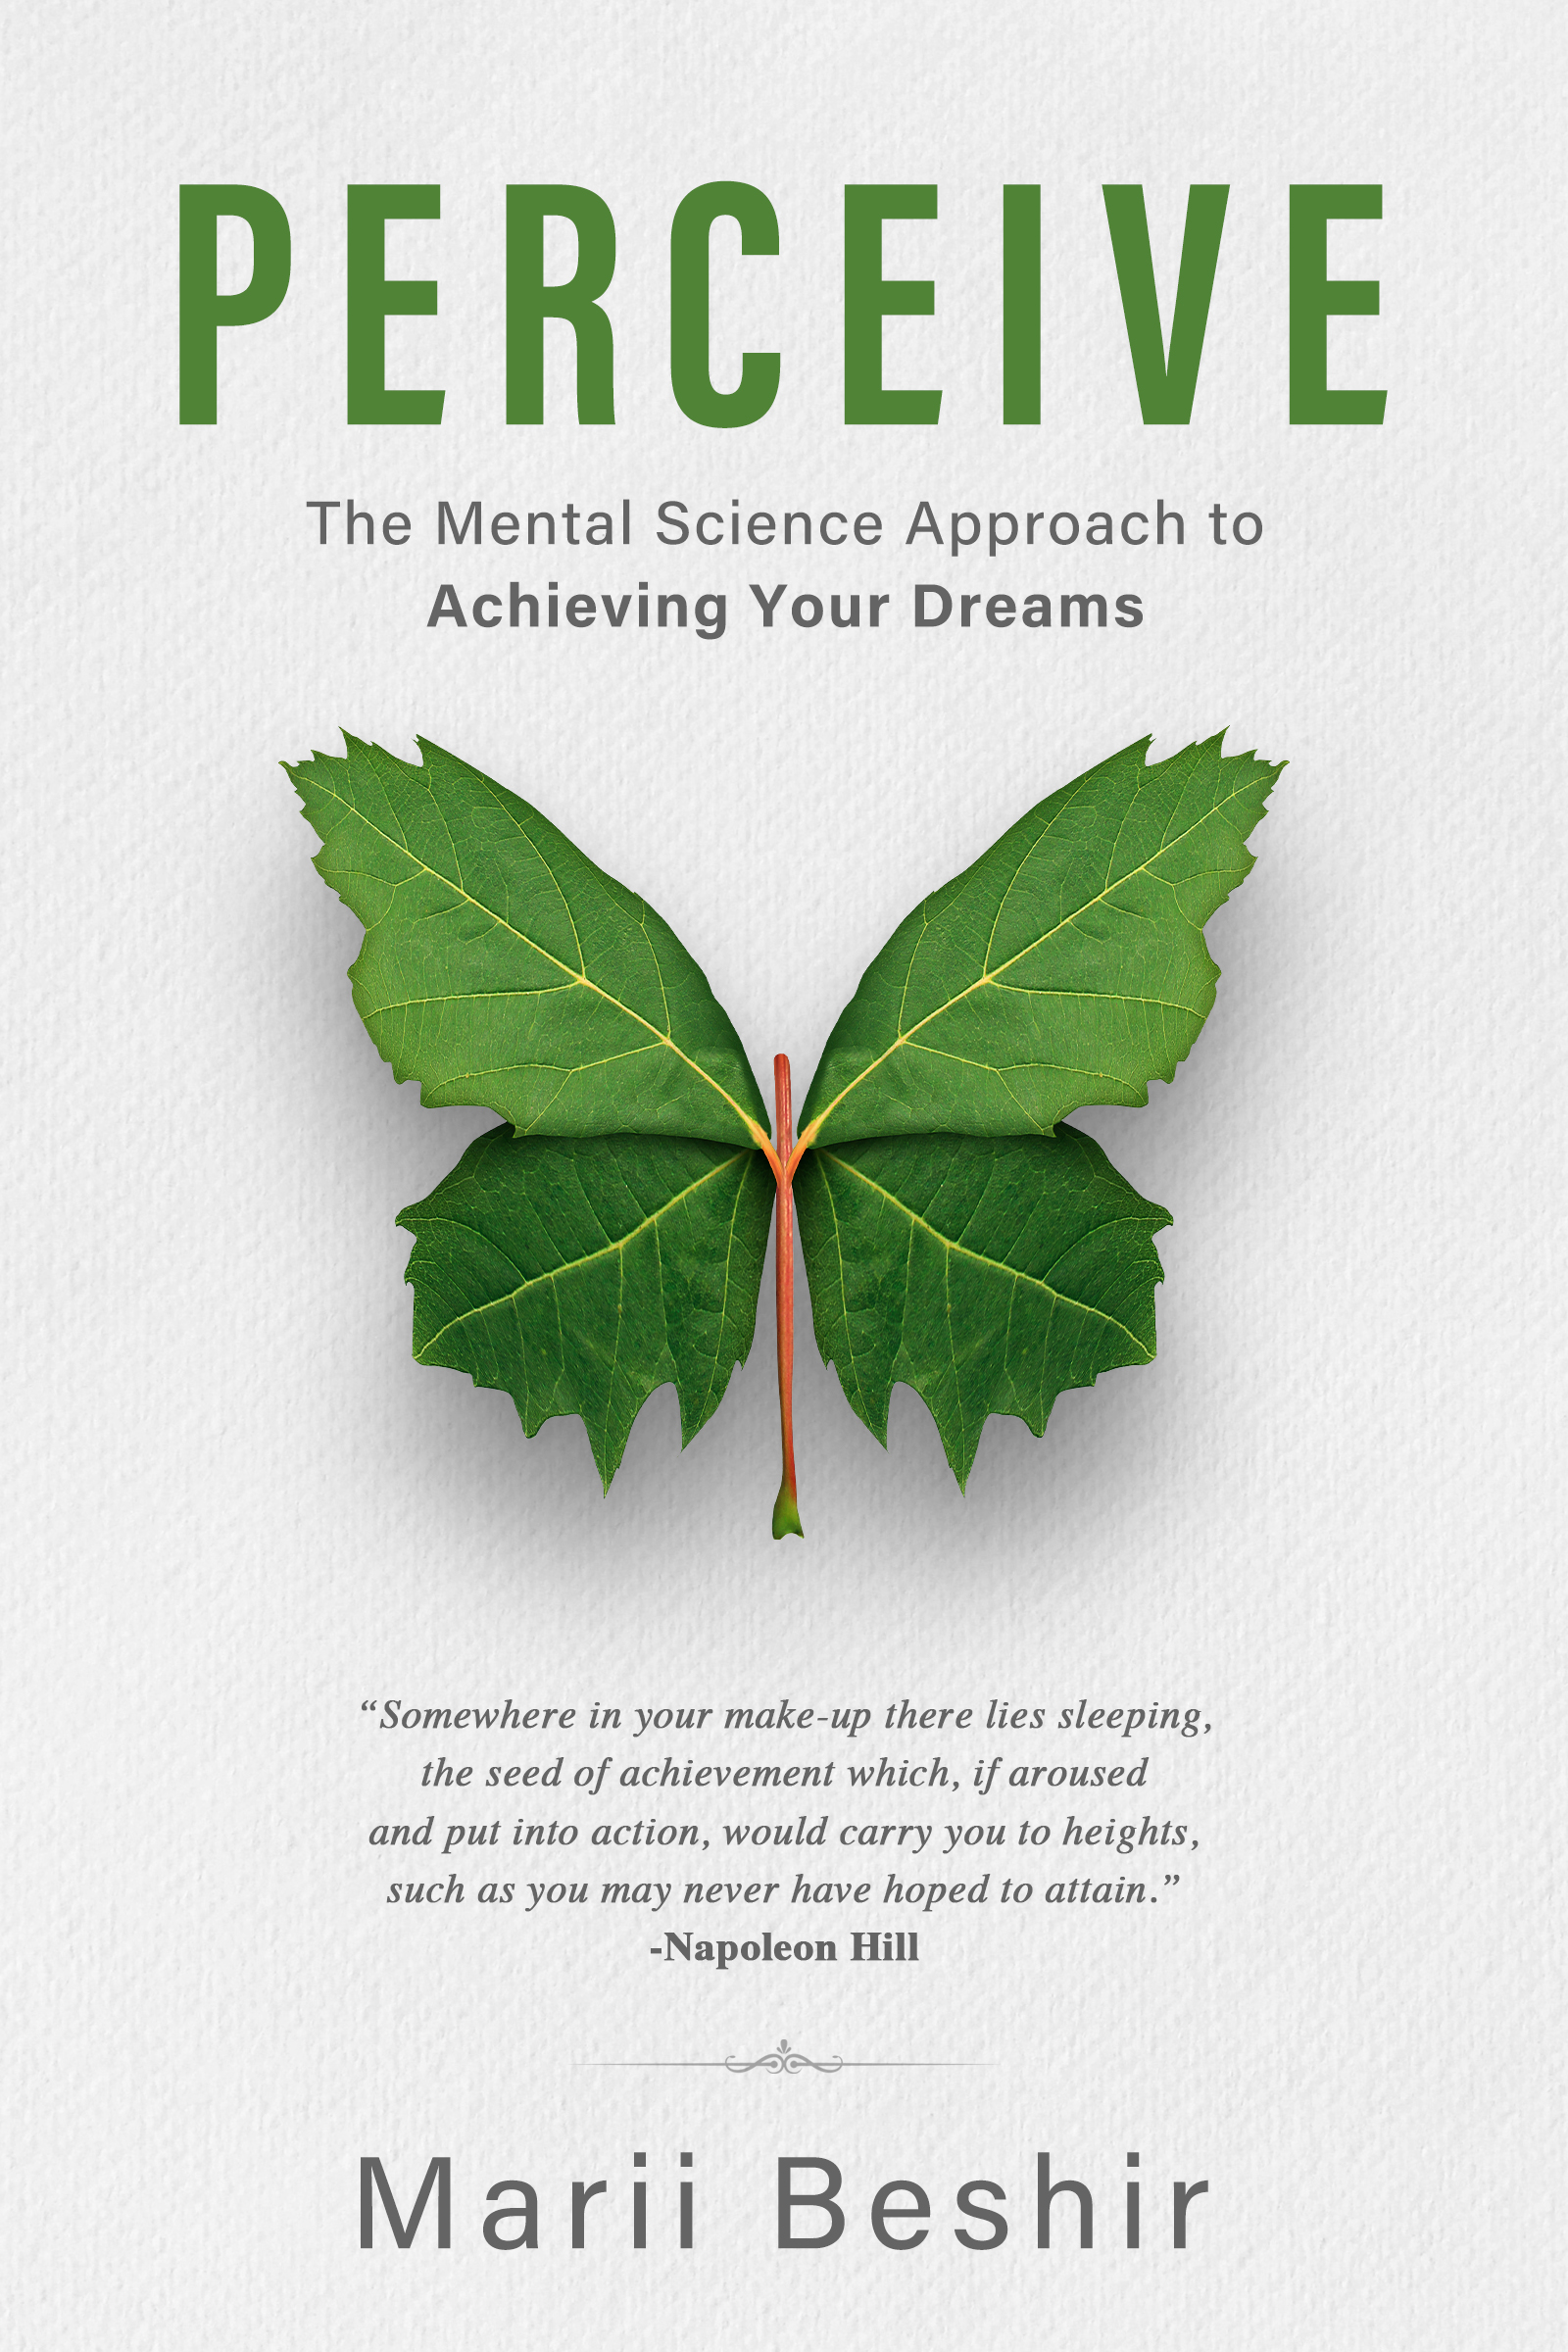 FREE: PERCEIVE: The Mental Science Approach to Achieving Your Dreams by Marii Beshir